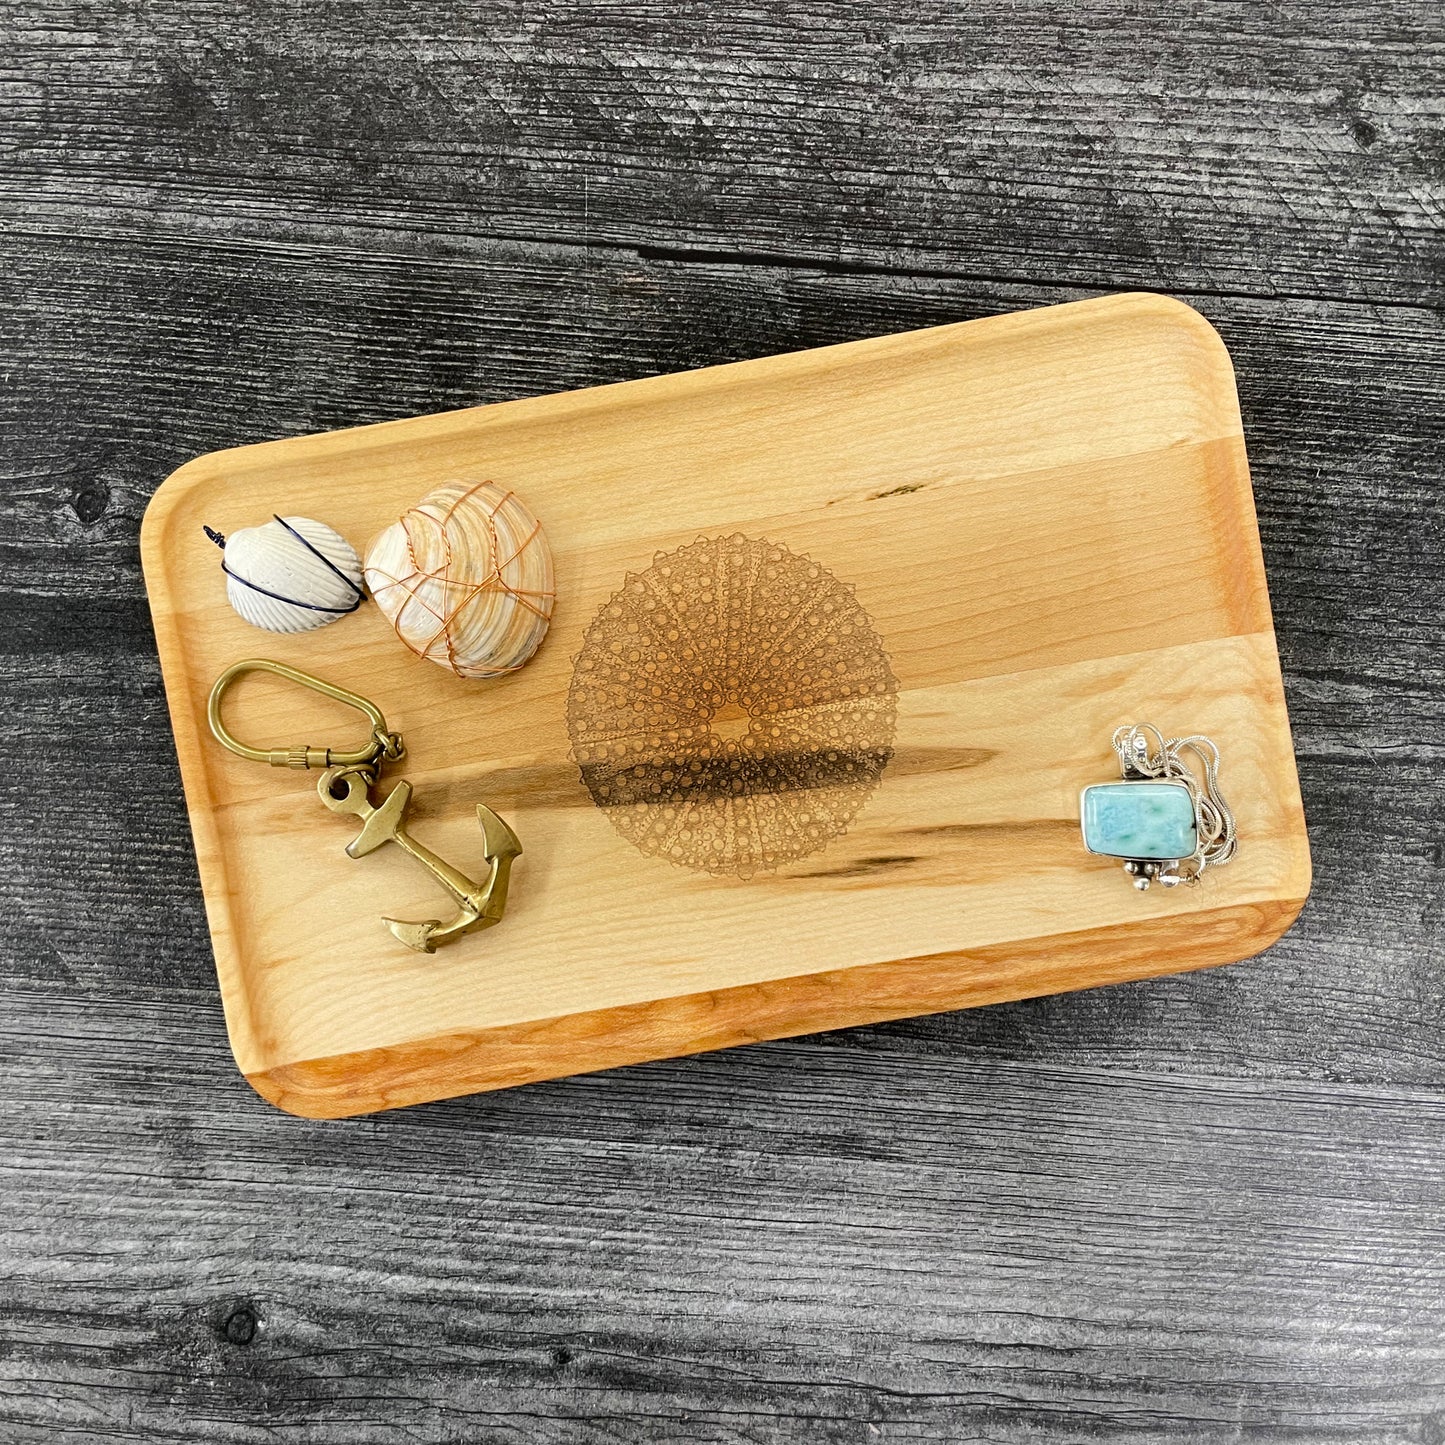 Laura Zindel Small Maple Appetizer Plate - More designs available